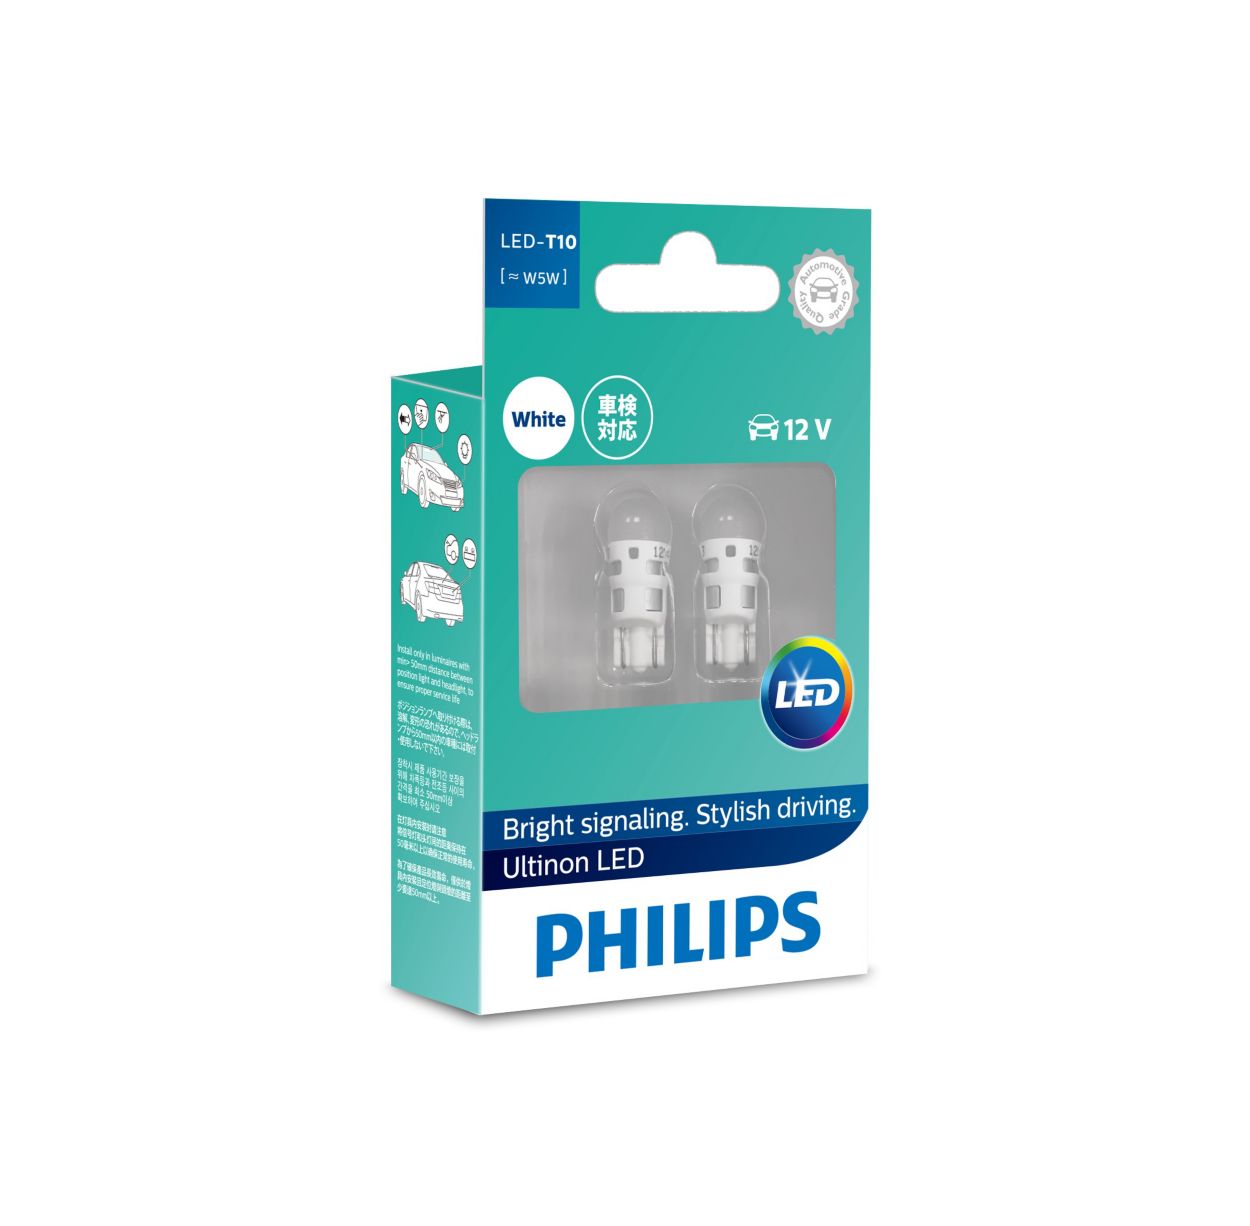 https://images.philips.com/is/image/philipsconsumer/41778c33f7034d58b6a5afac00cd123a?$jpglarge$&wid=1250